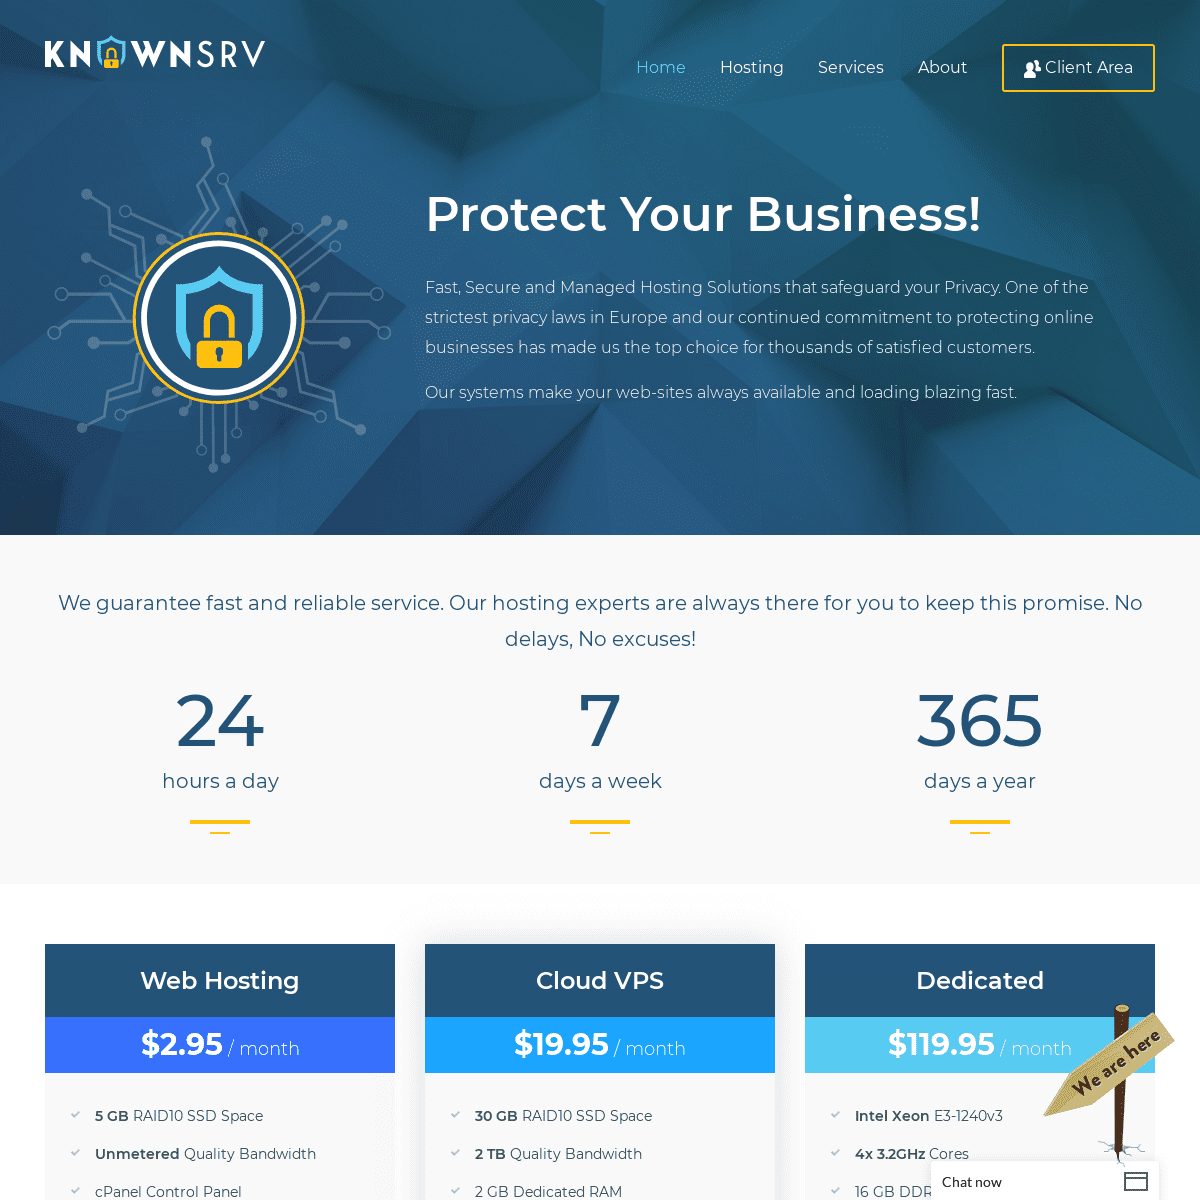 KnownSRV - Managed and Secure Europe Hosting with Guaranteed Privacy